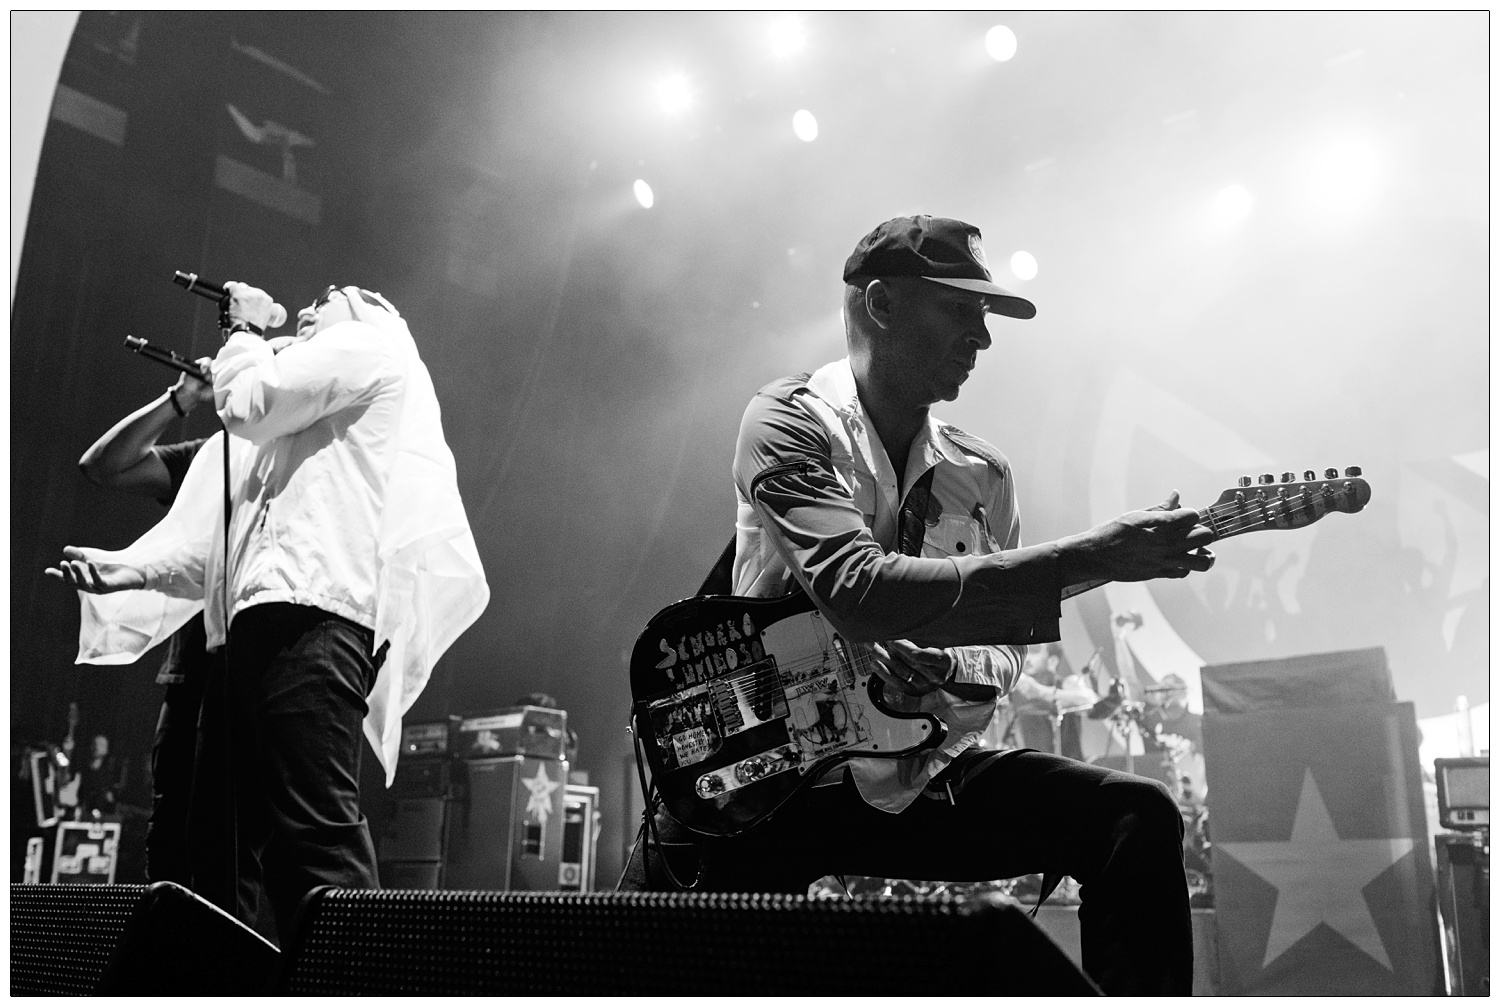 Tom Morello and B-Real with Prophets of Rage at Brixton Academy.